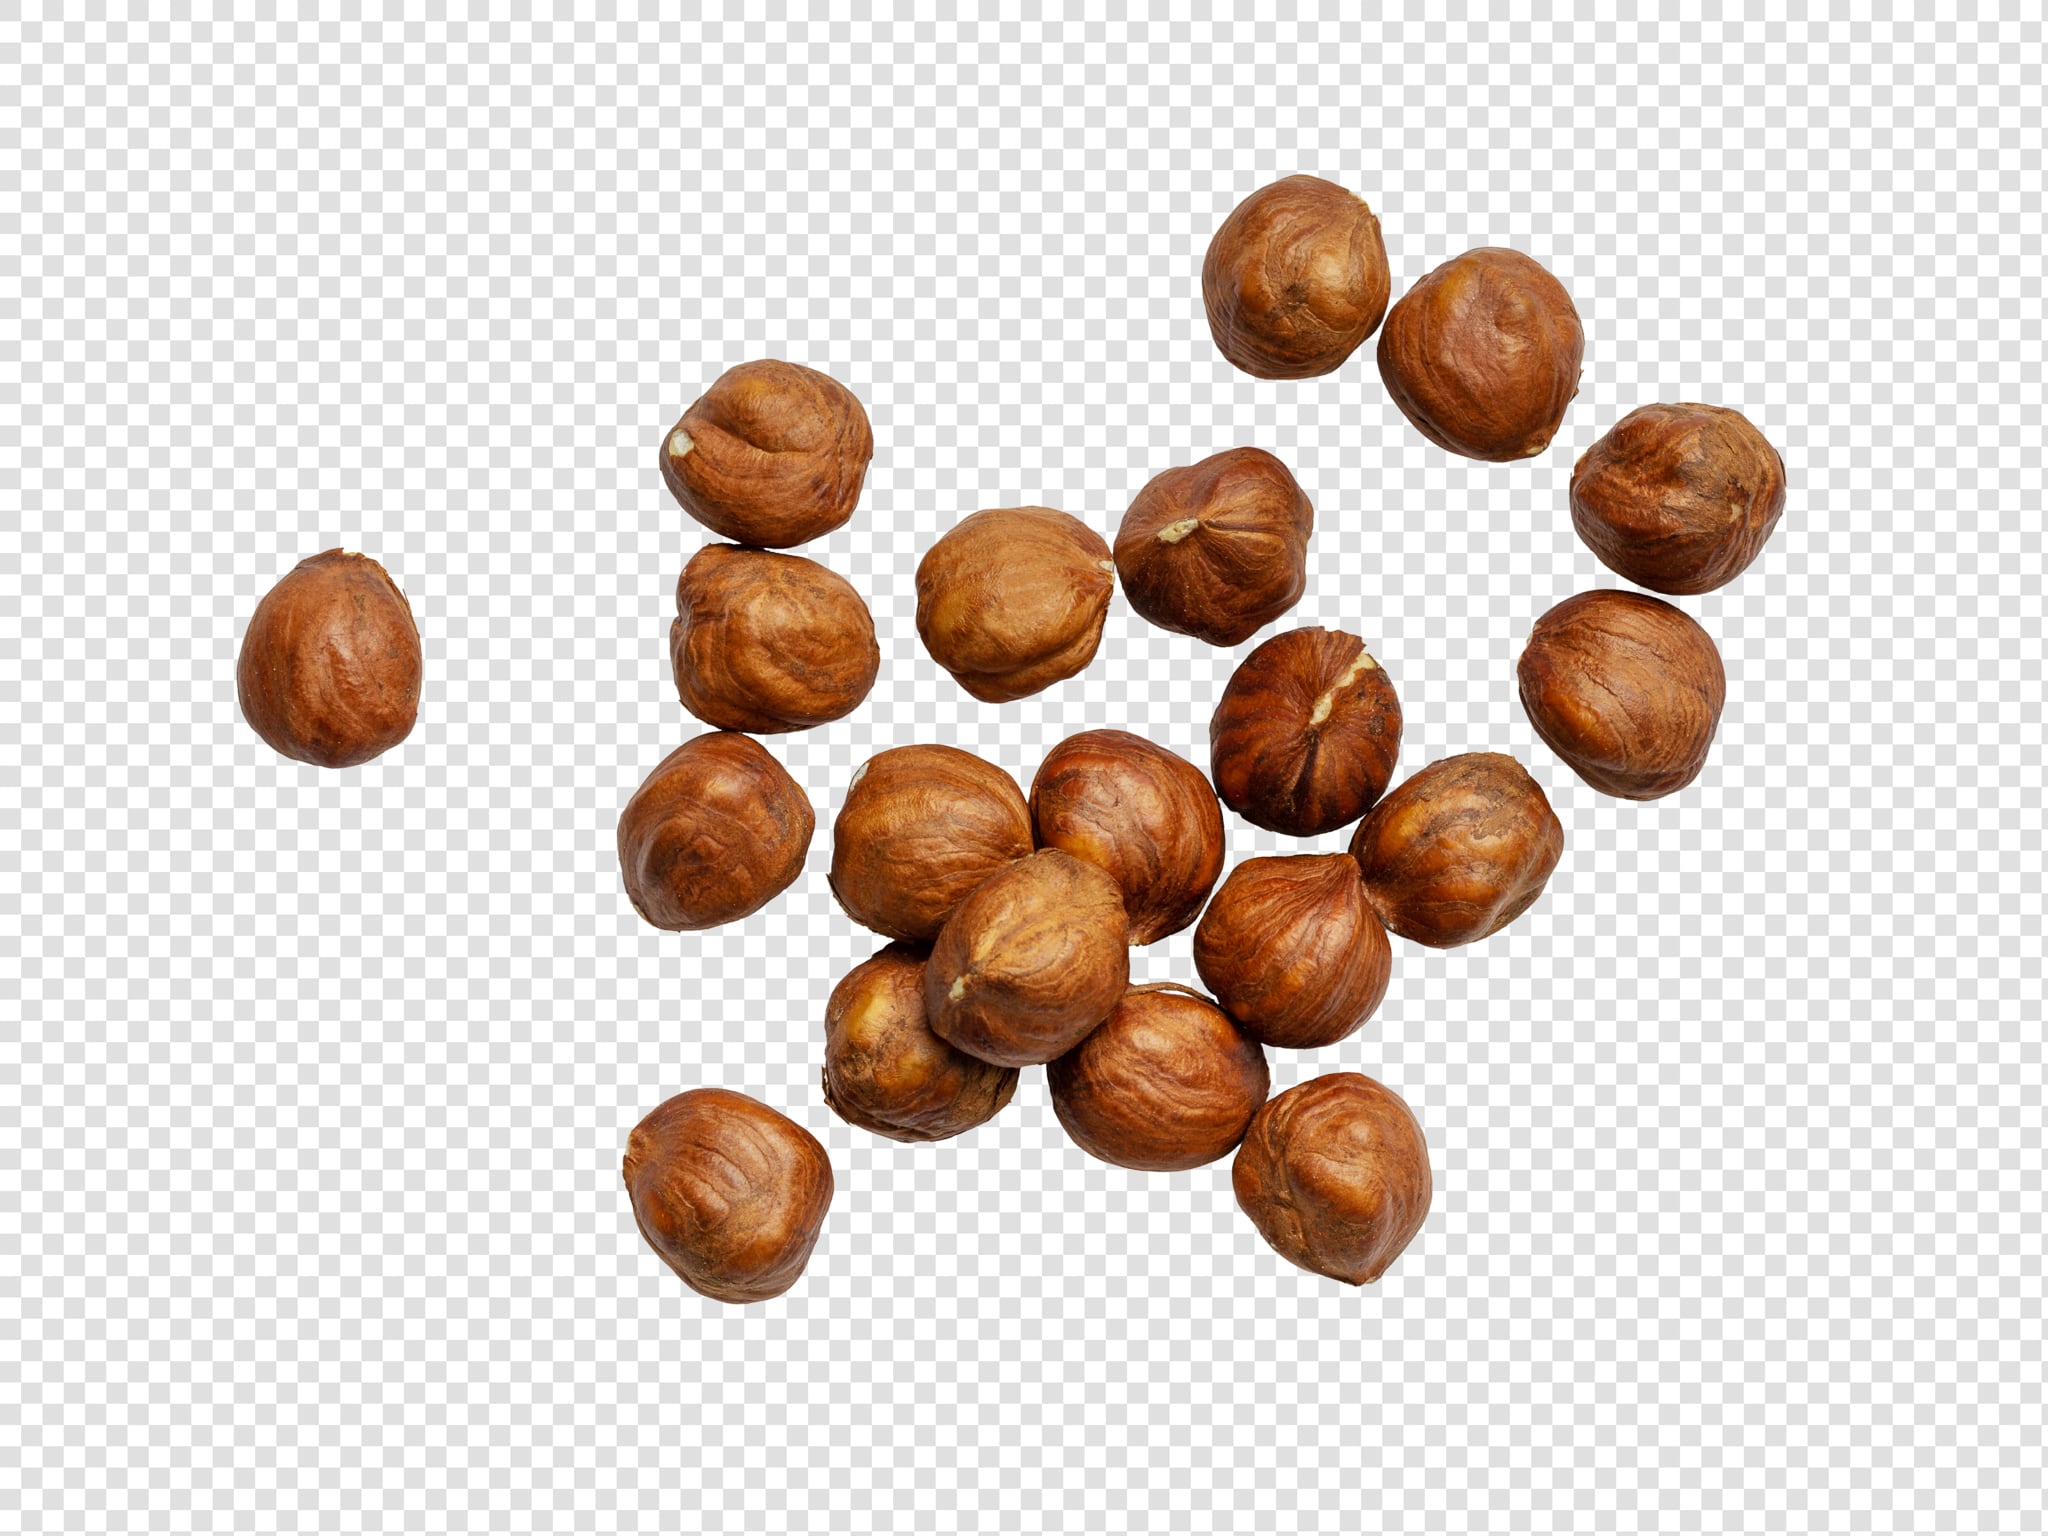 Clean Isolated PSD image of Hazelnut on transparent background with separated shadow